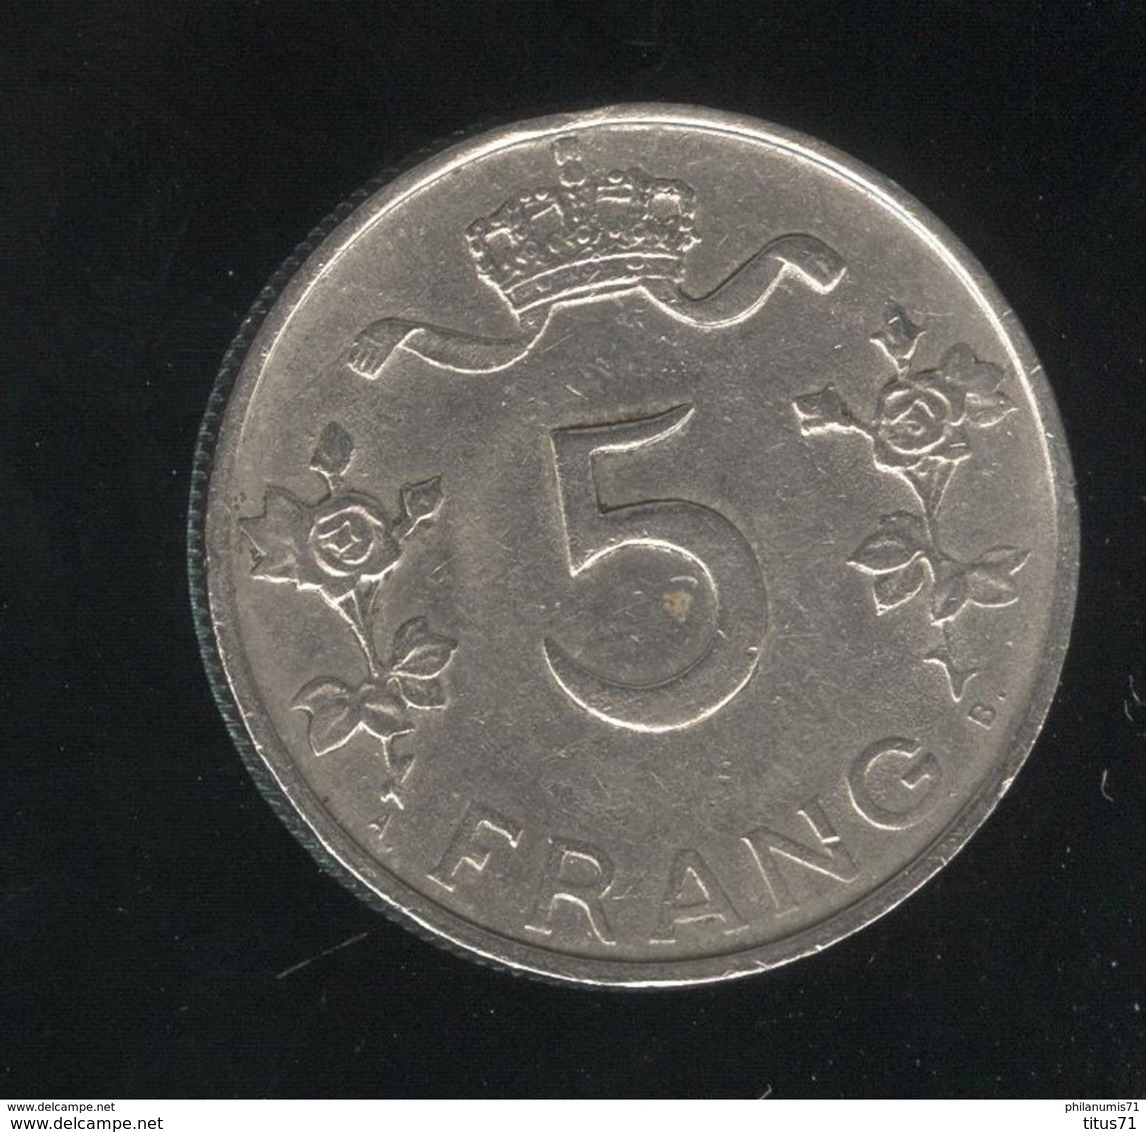 5 Frang Luxembourg 1949 SUP - Luxemburg